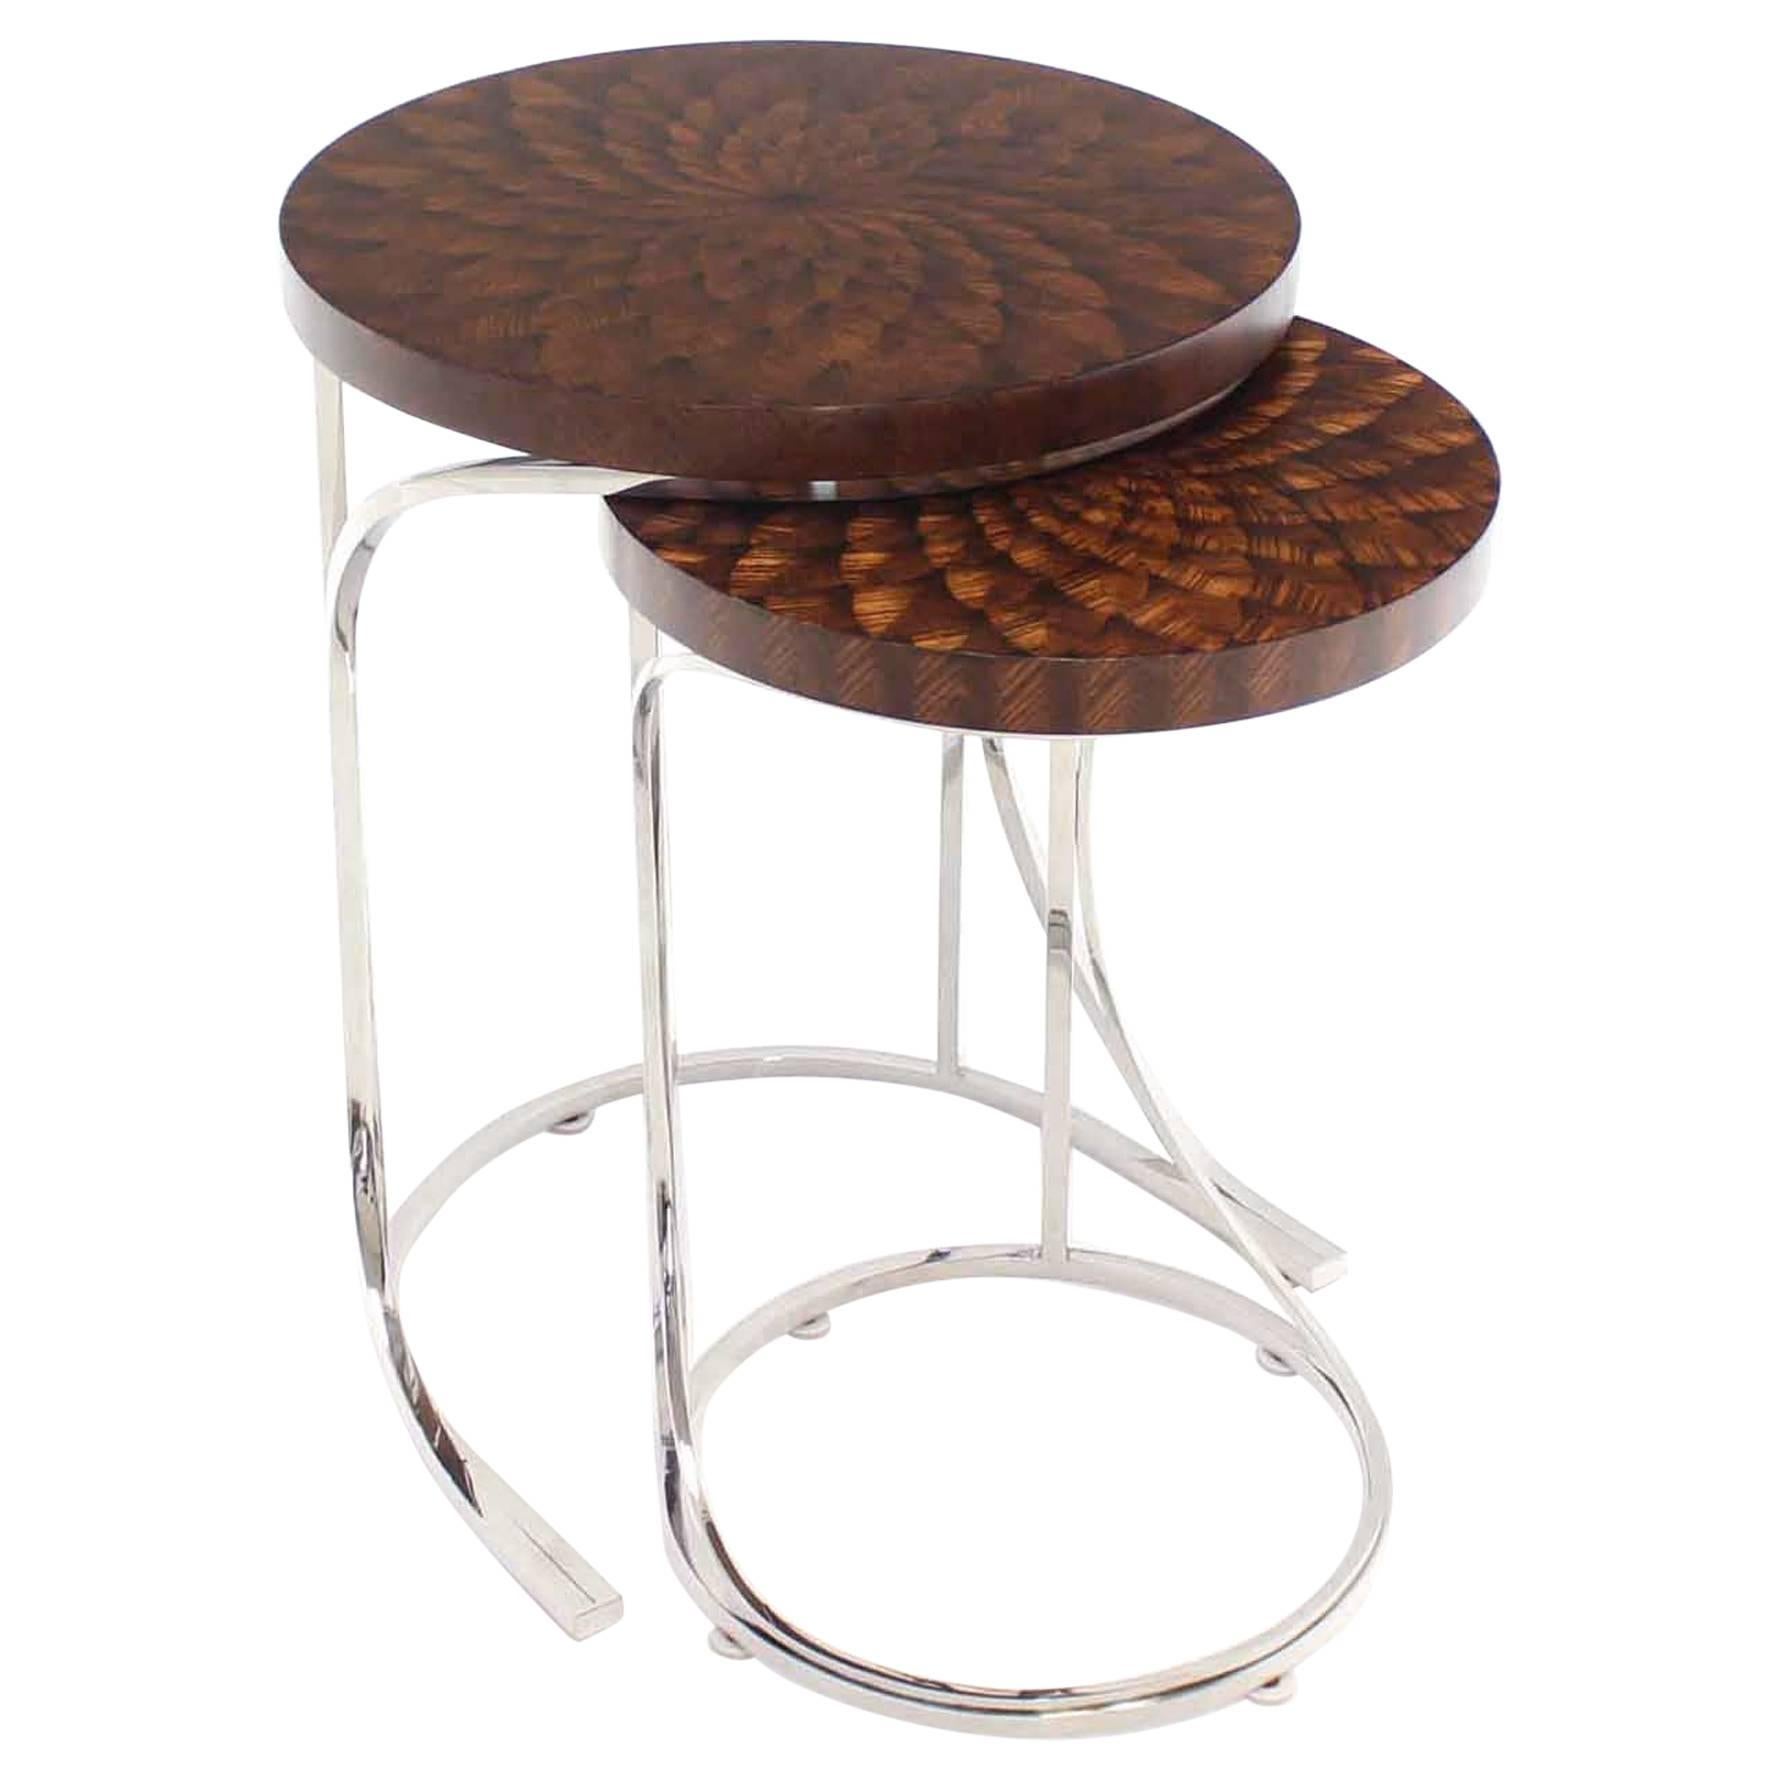 Set of Two Round Nesting Tables